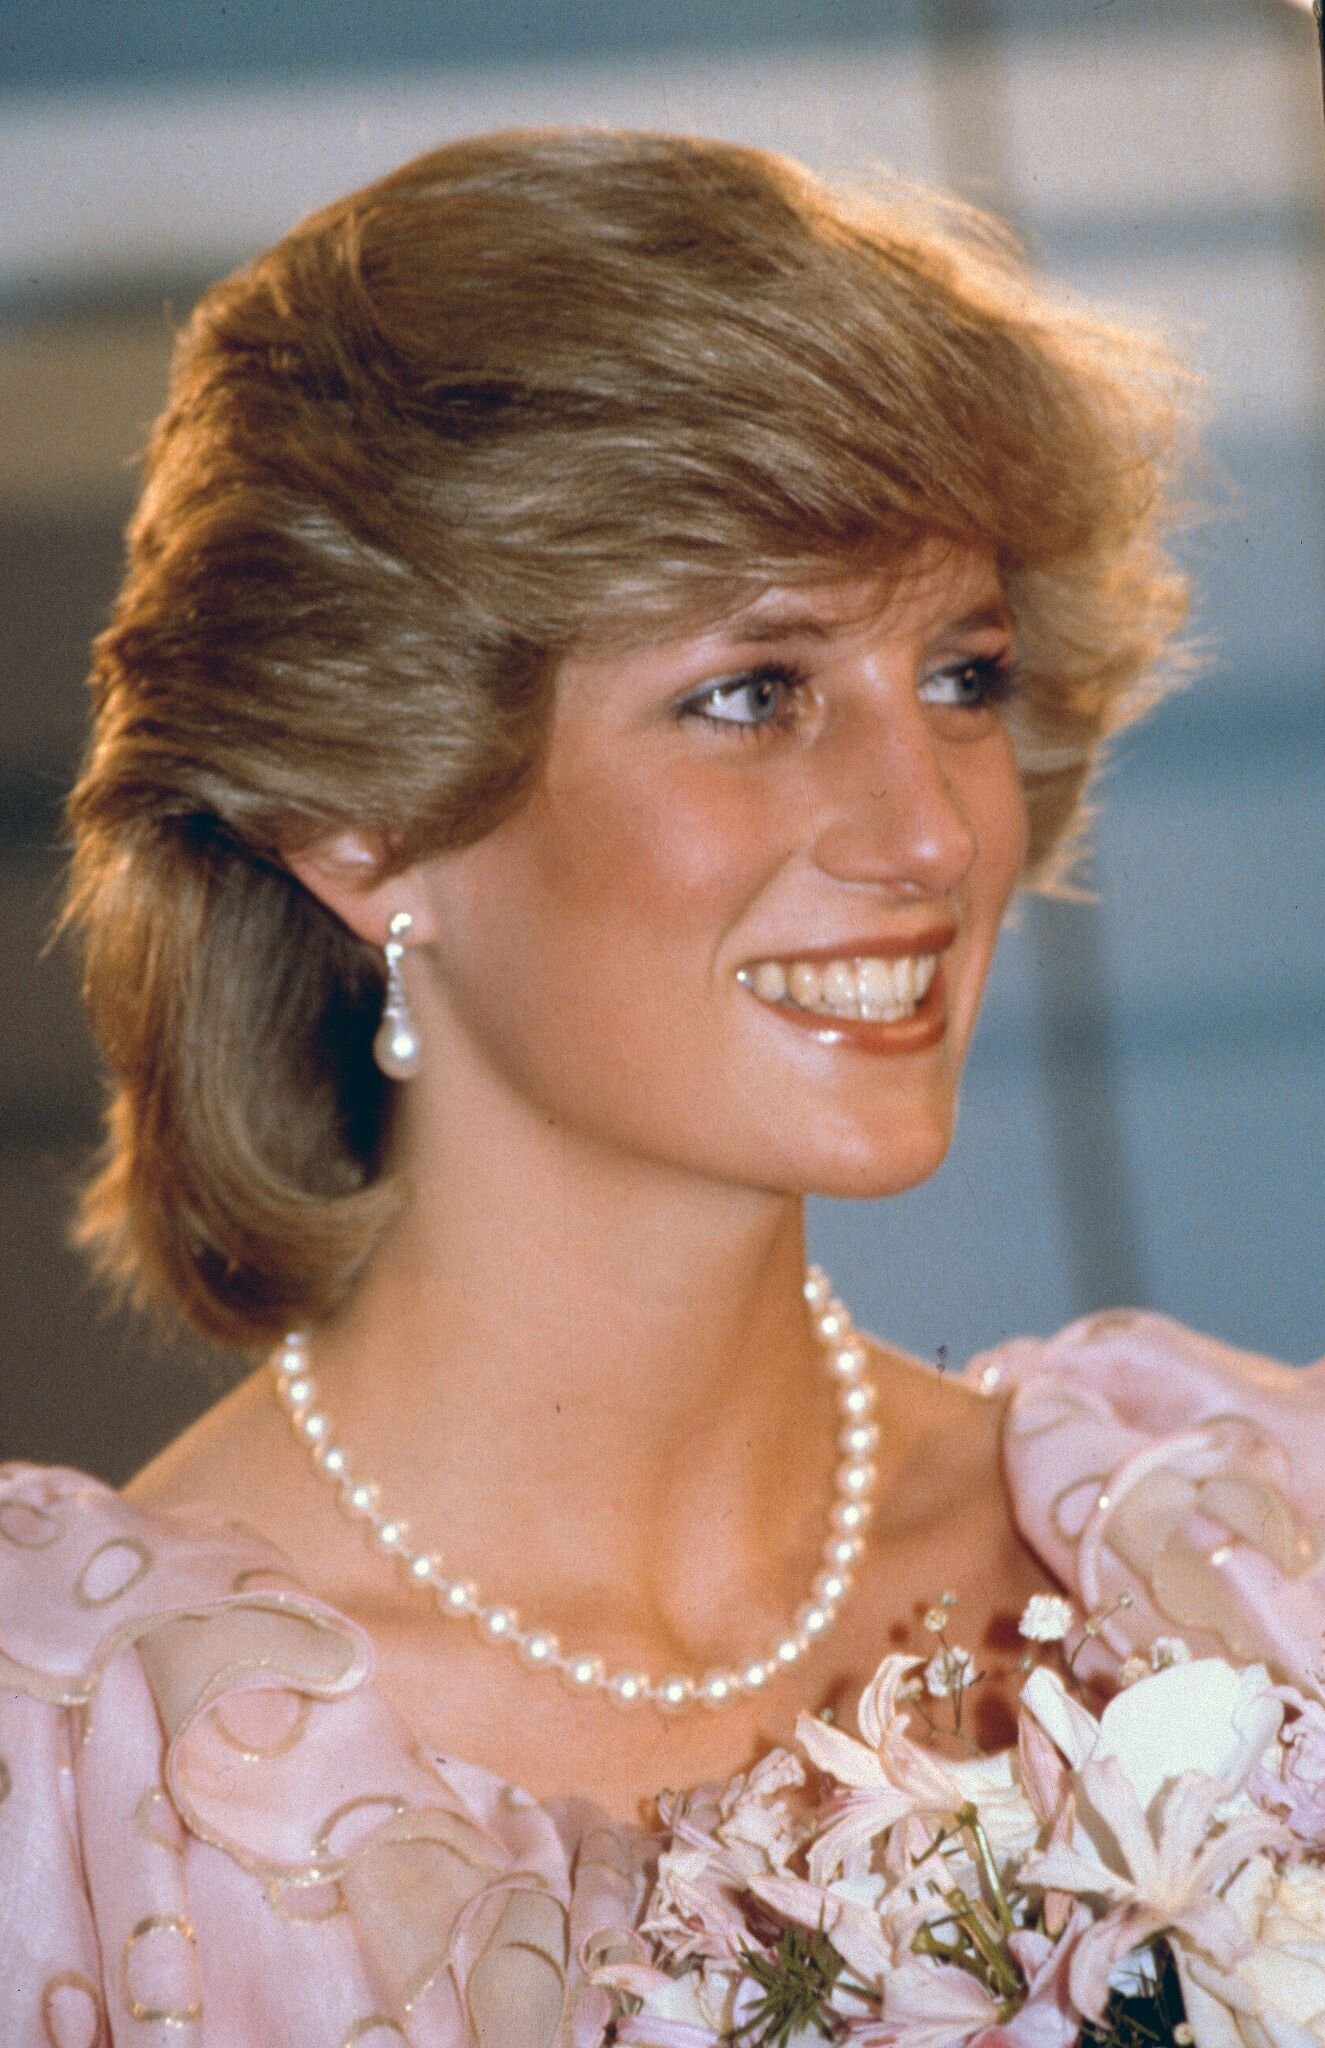 Diana, Princess of Wales attends a gala concert during a tour of Australia on April 14, 1983 | Getty Images